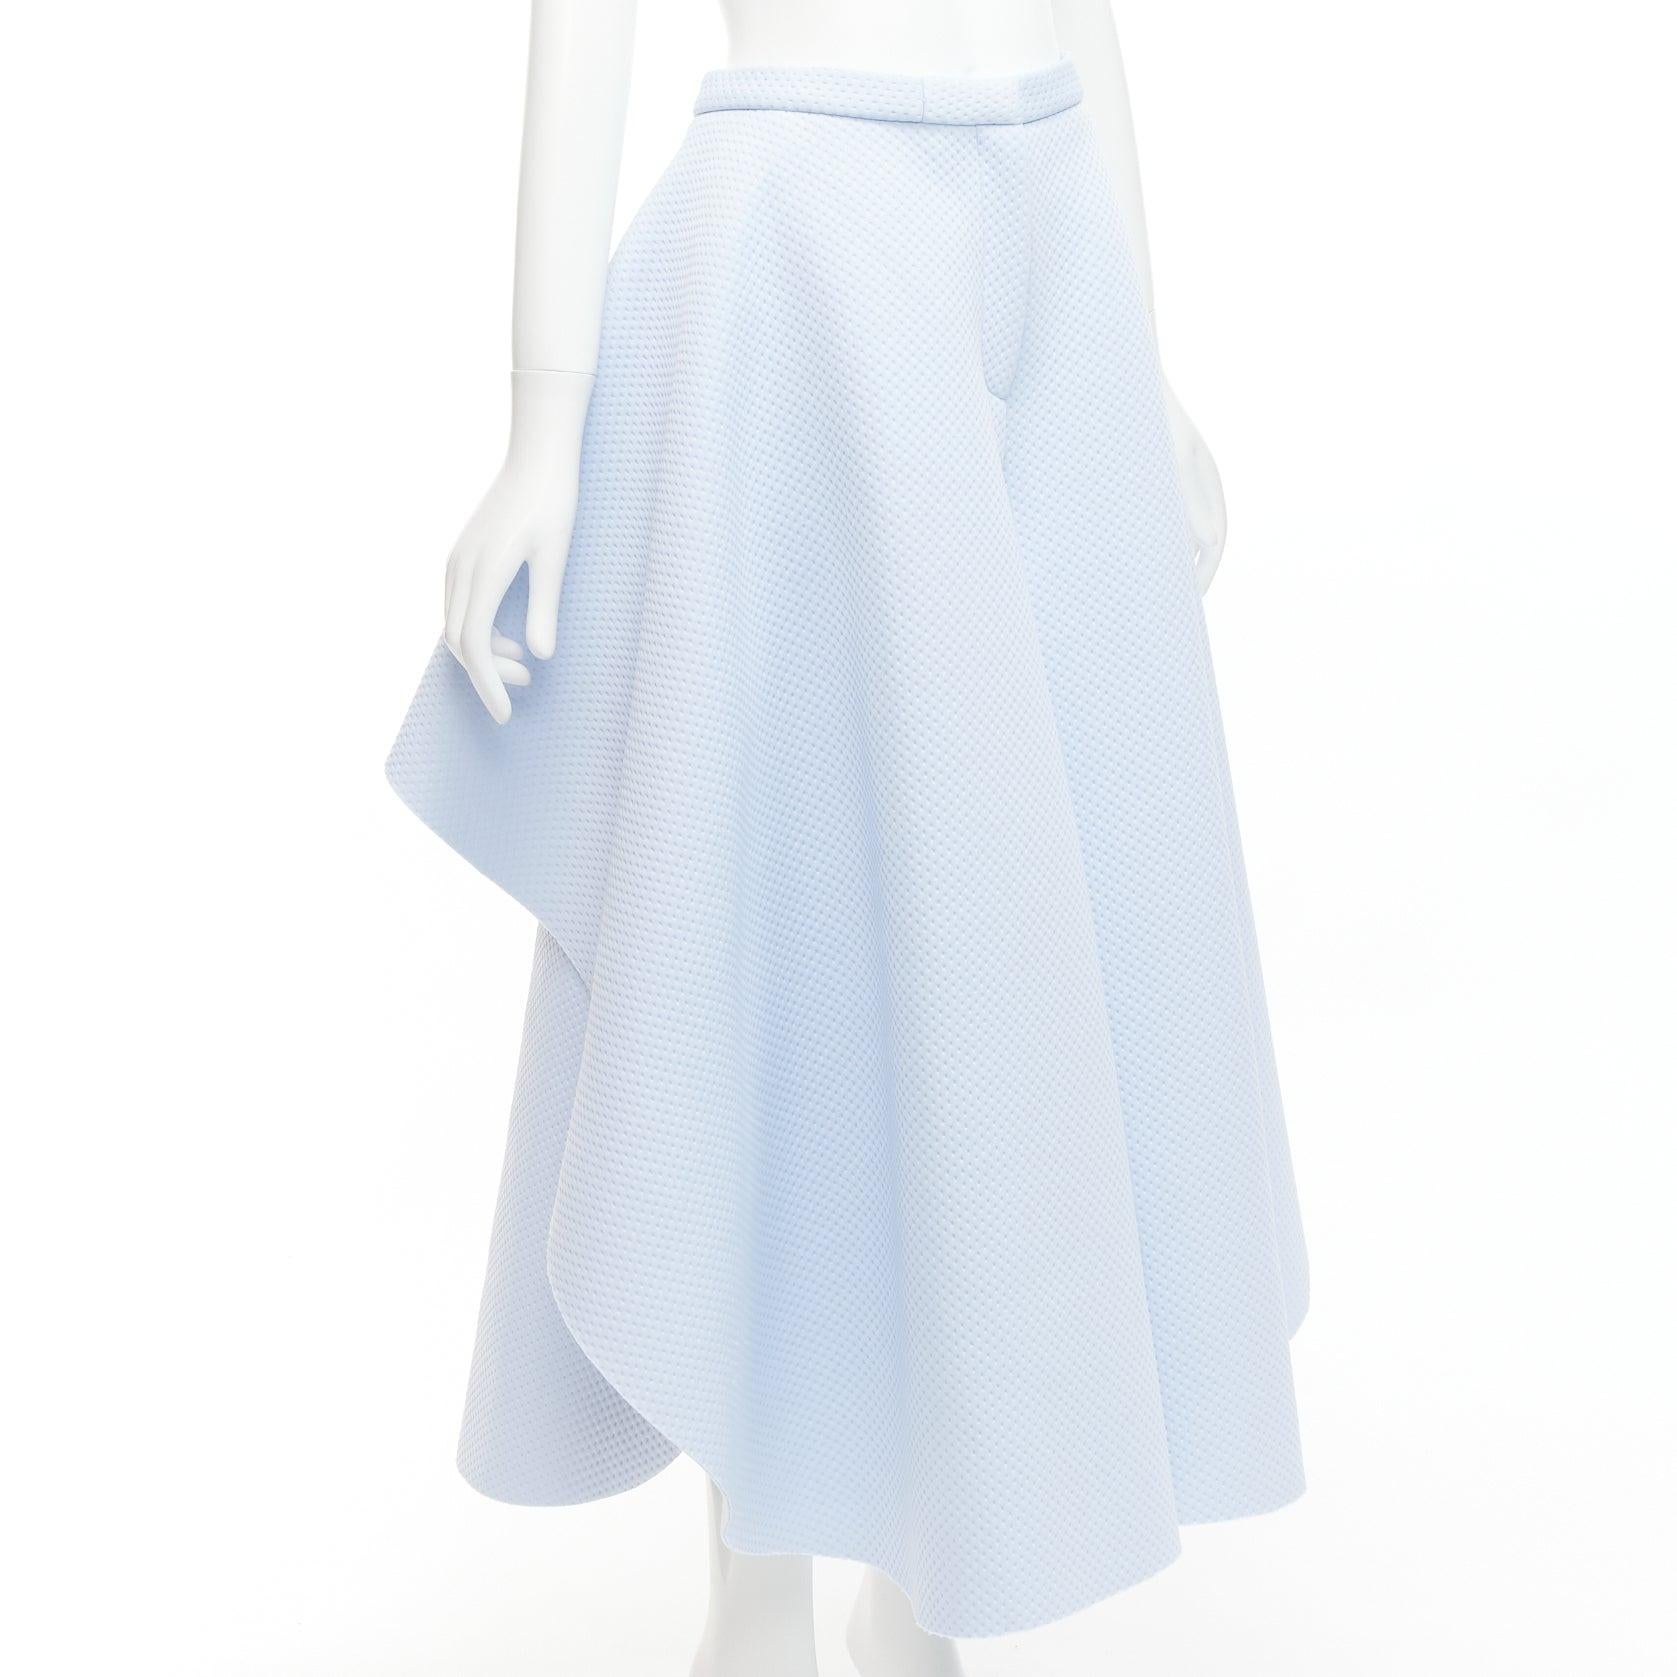 XIAO LI powder blue crepe texture neoprene Aline scuba wide culottes XS
Reference: MAFK/A00016
Brand: Xiao Li
Material: Neoprene
Color: Blue
Pattern: Solid
Closure: Zip Fly
Lining: White Fabric
Extra Details: Inverted pleat and layered back.
Made